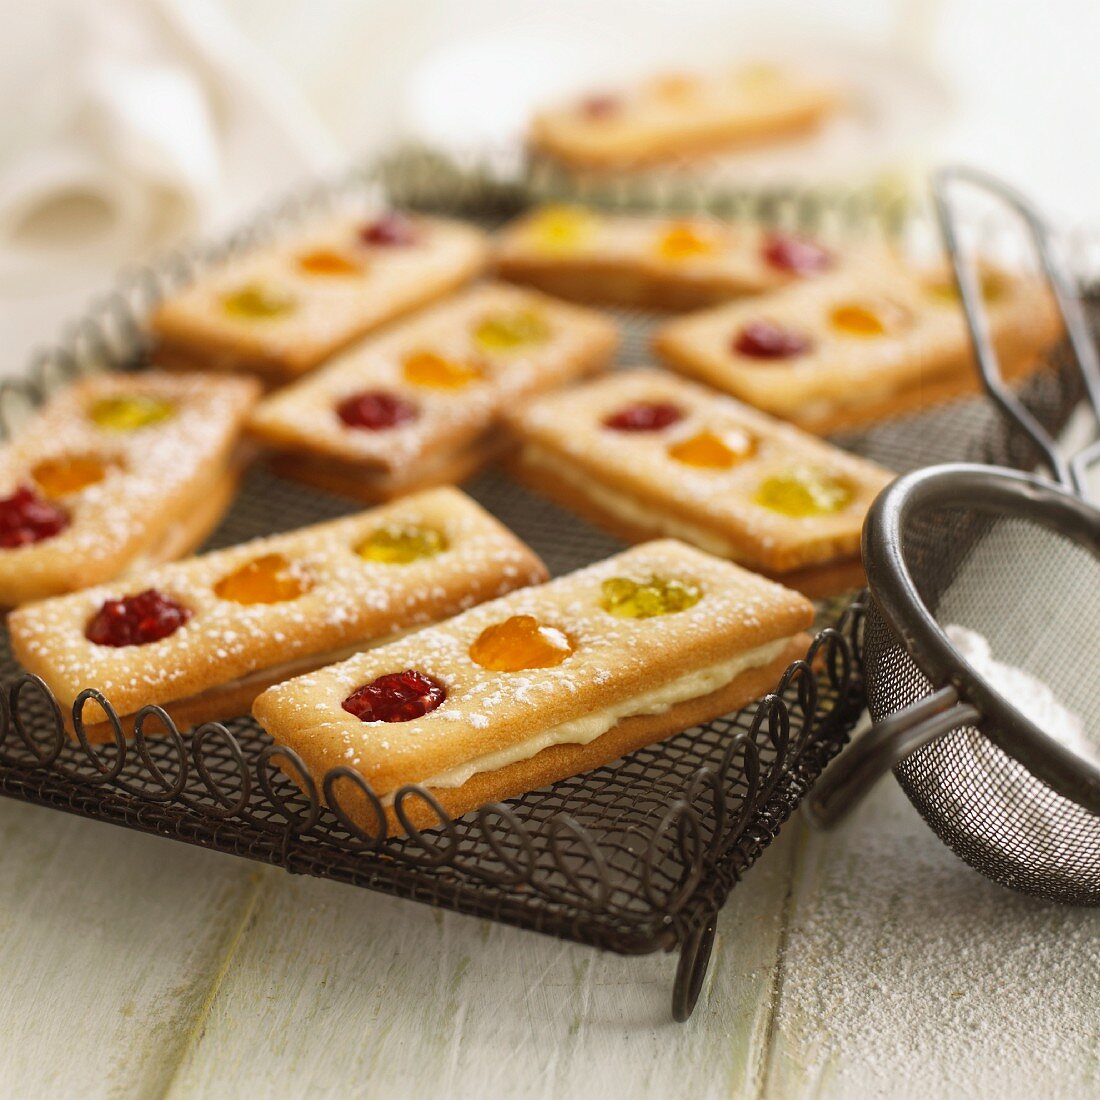 Traffic light biscuits with jam